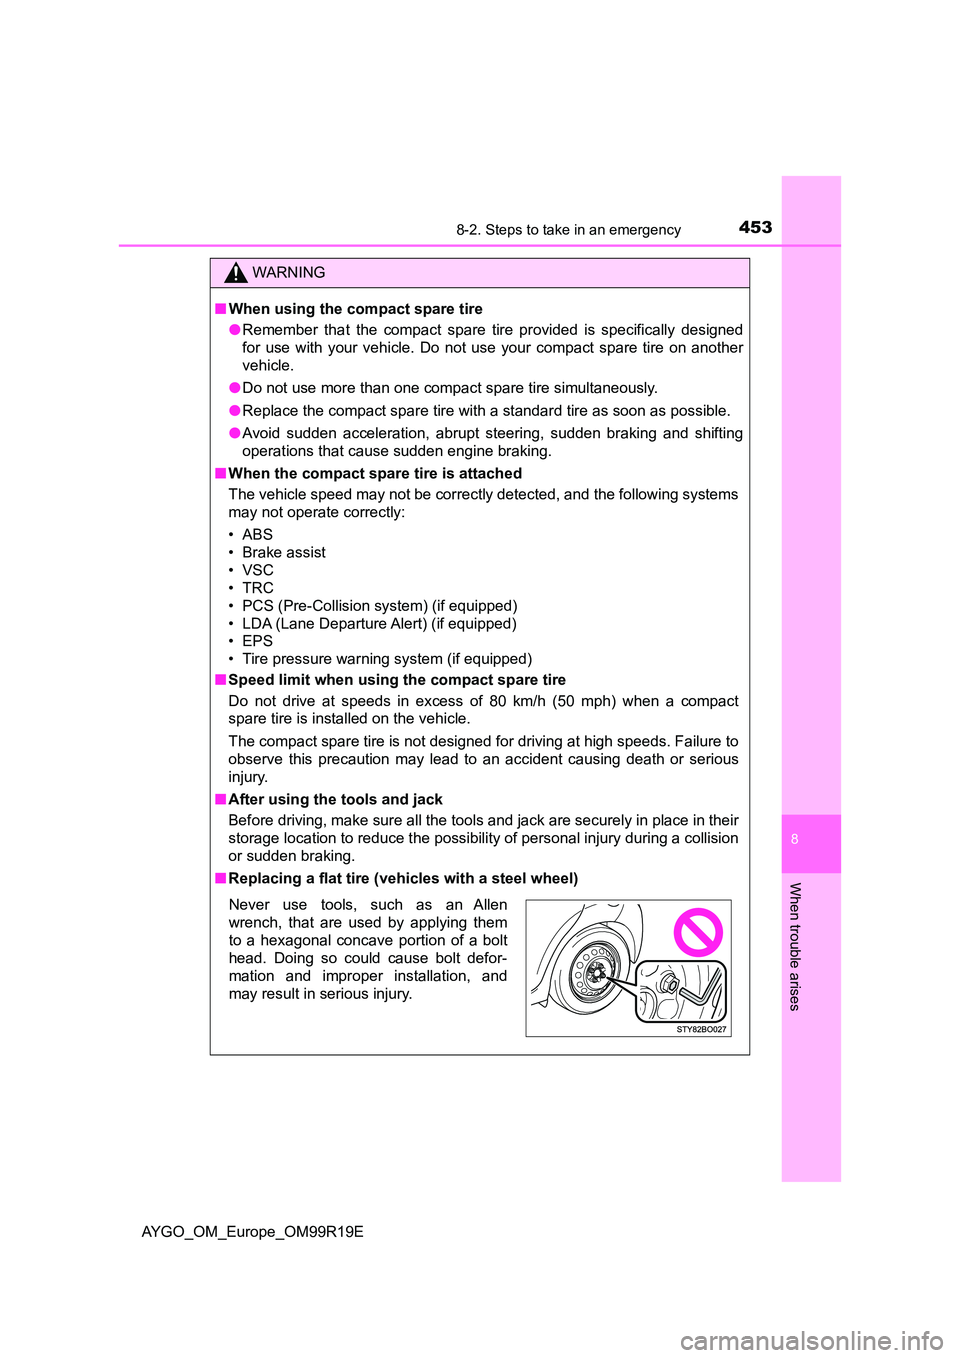 TOYOTA AYGO 2019  Owners Manual (in English) 4538-2. Steps to take in an emergency
8
When trouble arises
AYGO_OM_Europe_OM99R19E
WARNING
■When using the compact spare tire 
● Remember that the compact spare tire provided is specifically desi